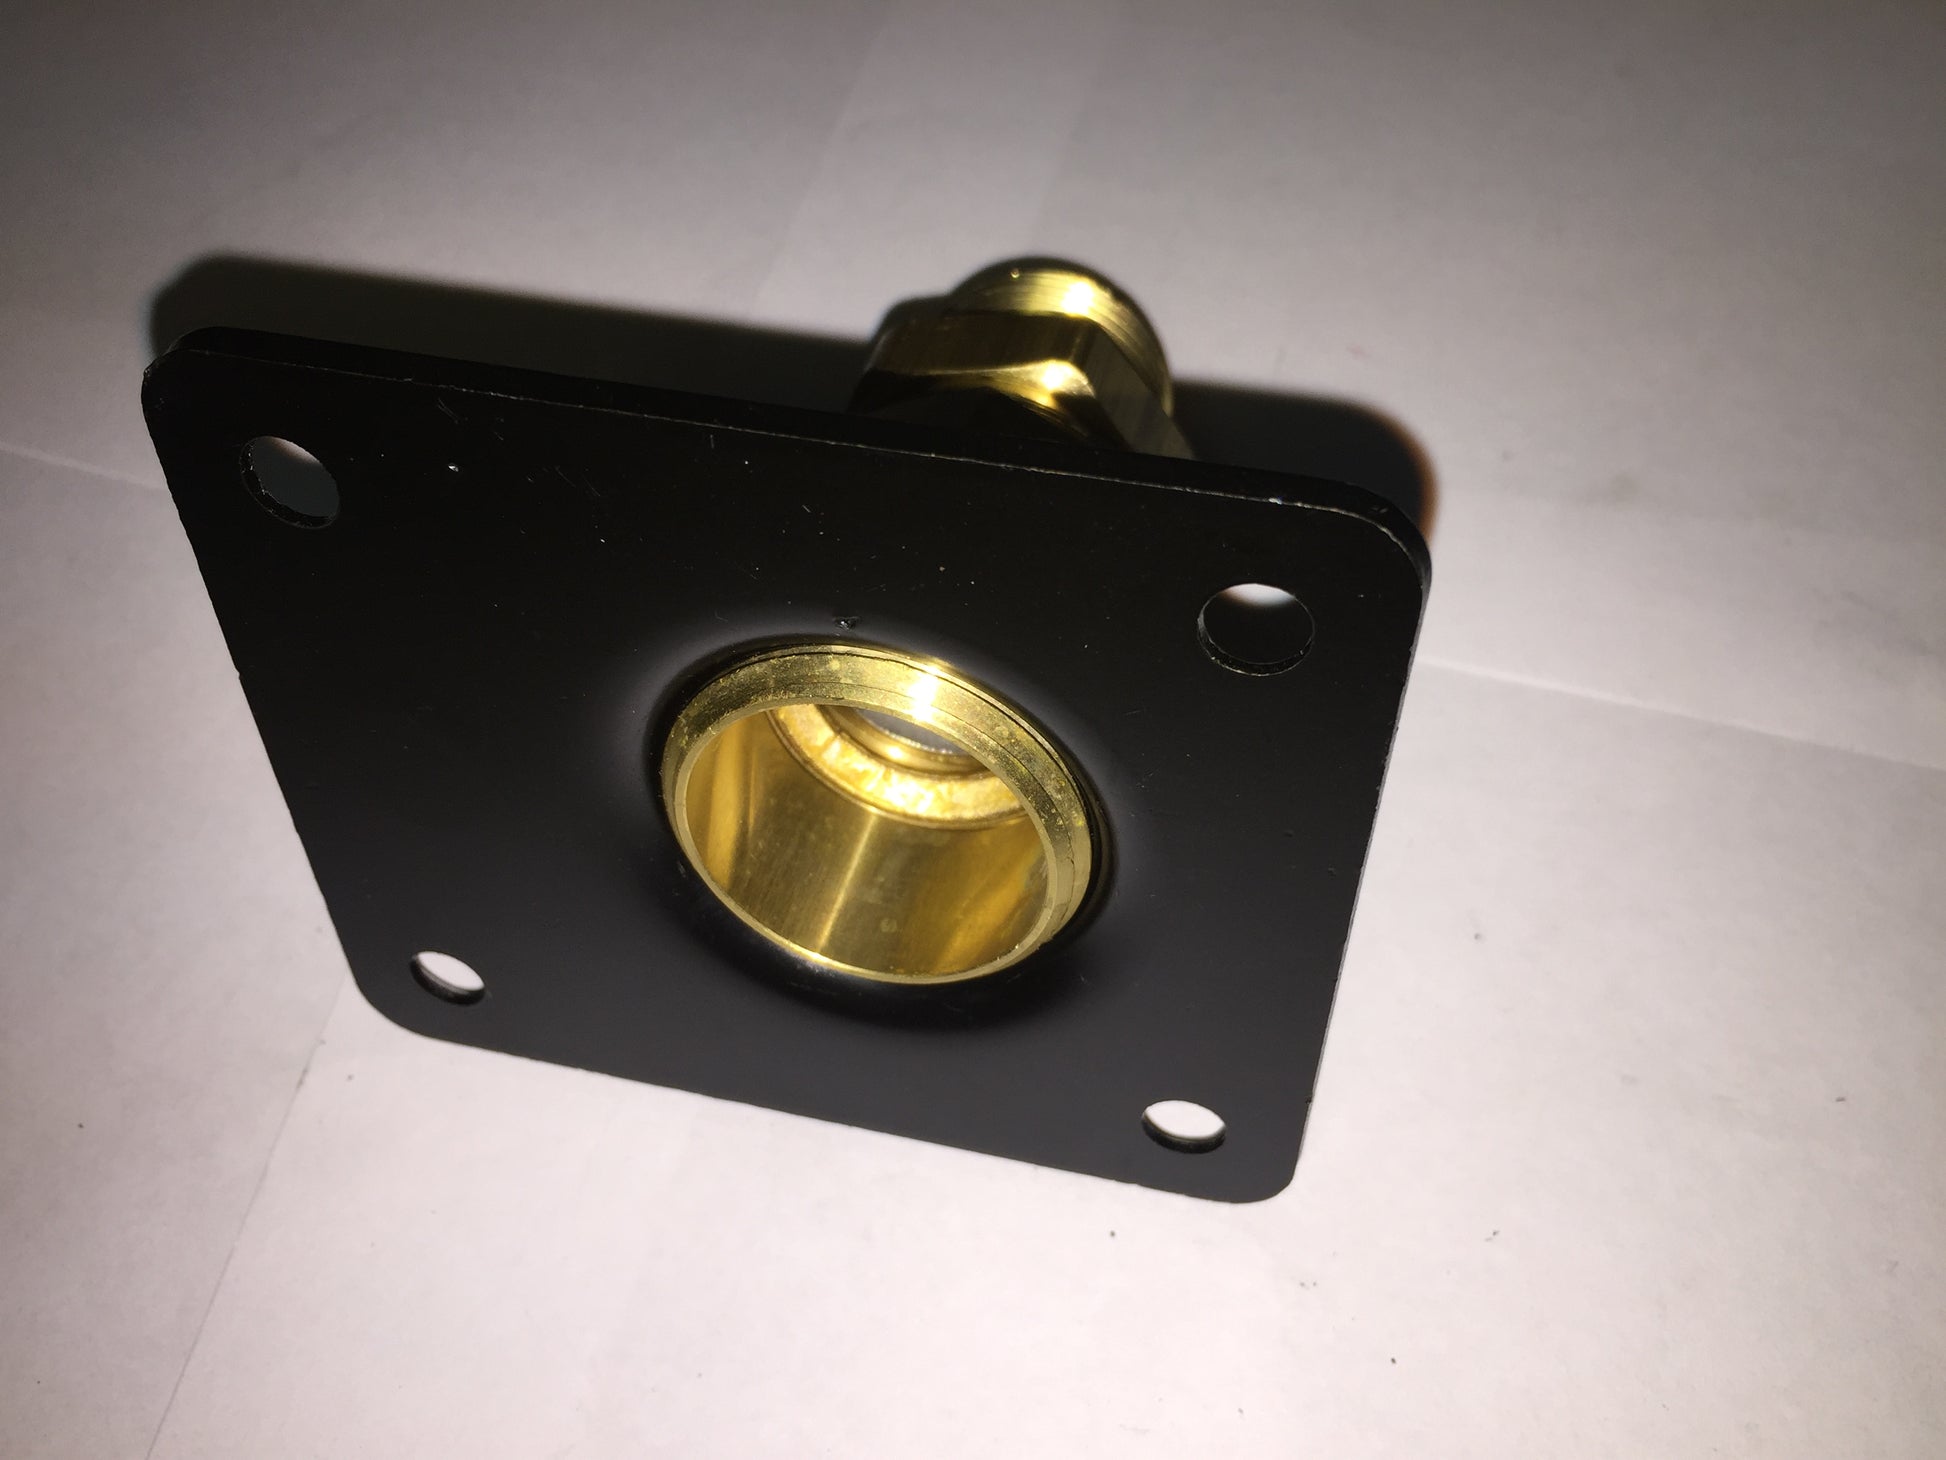 3/4" AUTOFLARE FLANGE FITTING/TERMINATION FOR FLEXIBLE GAS PIPING